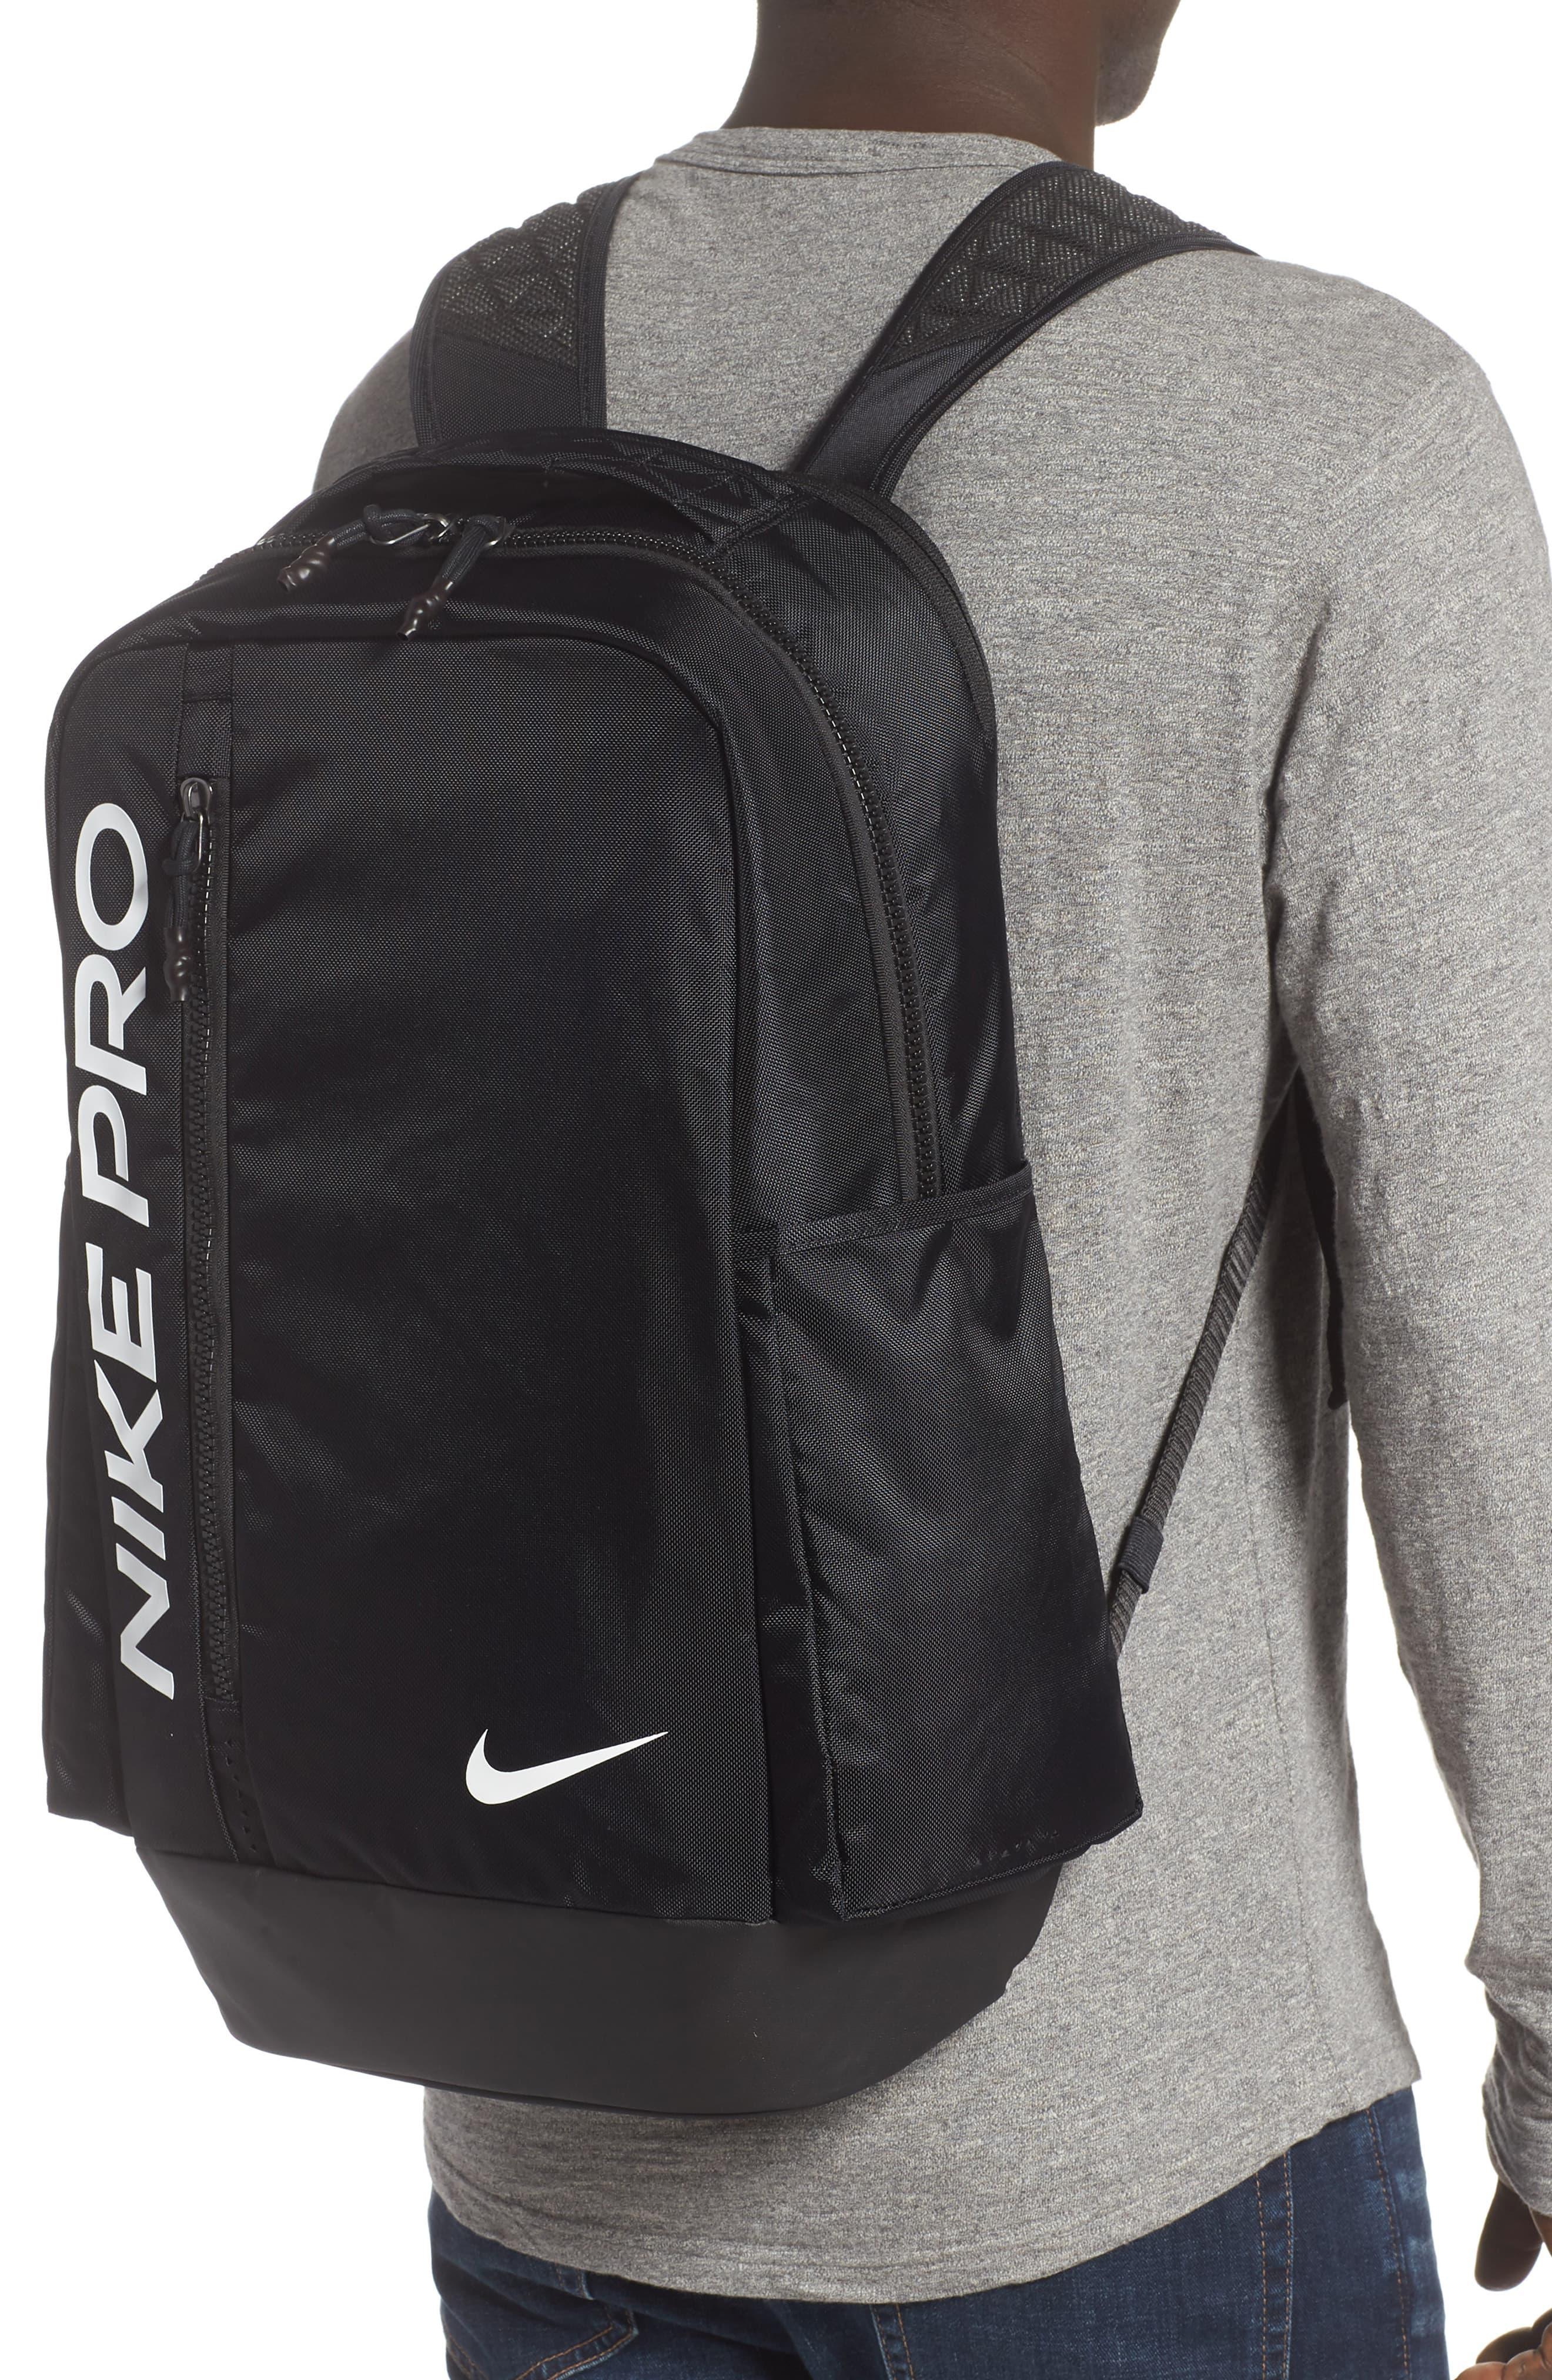 Nike Vapor Backpack Discount, 40% OFF | www.angloamericancentre.it